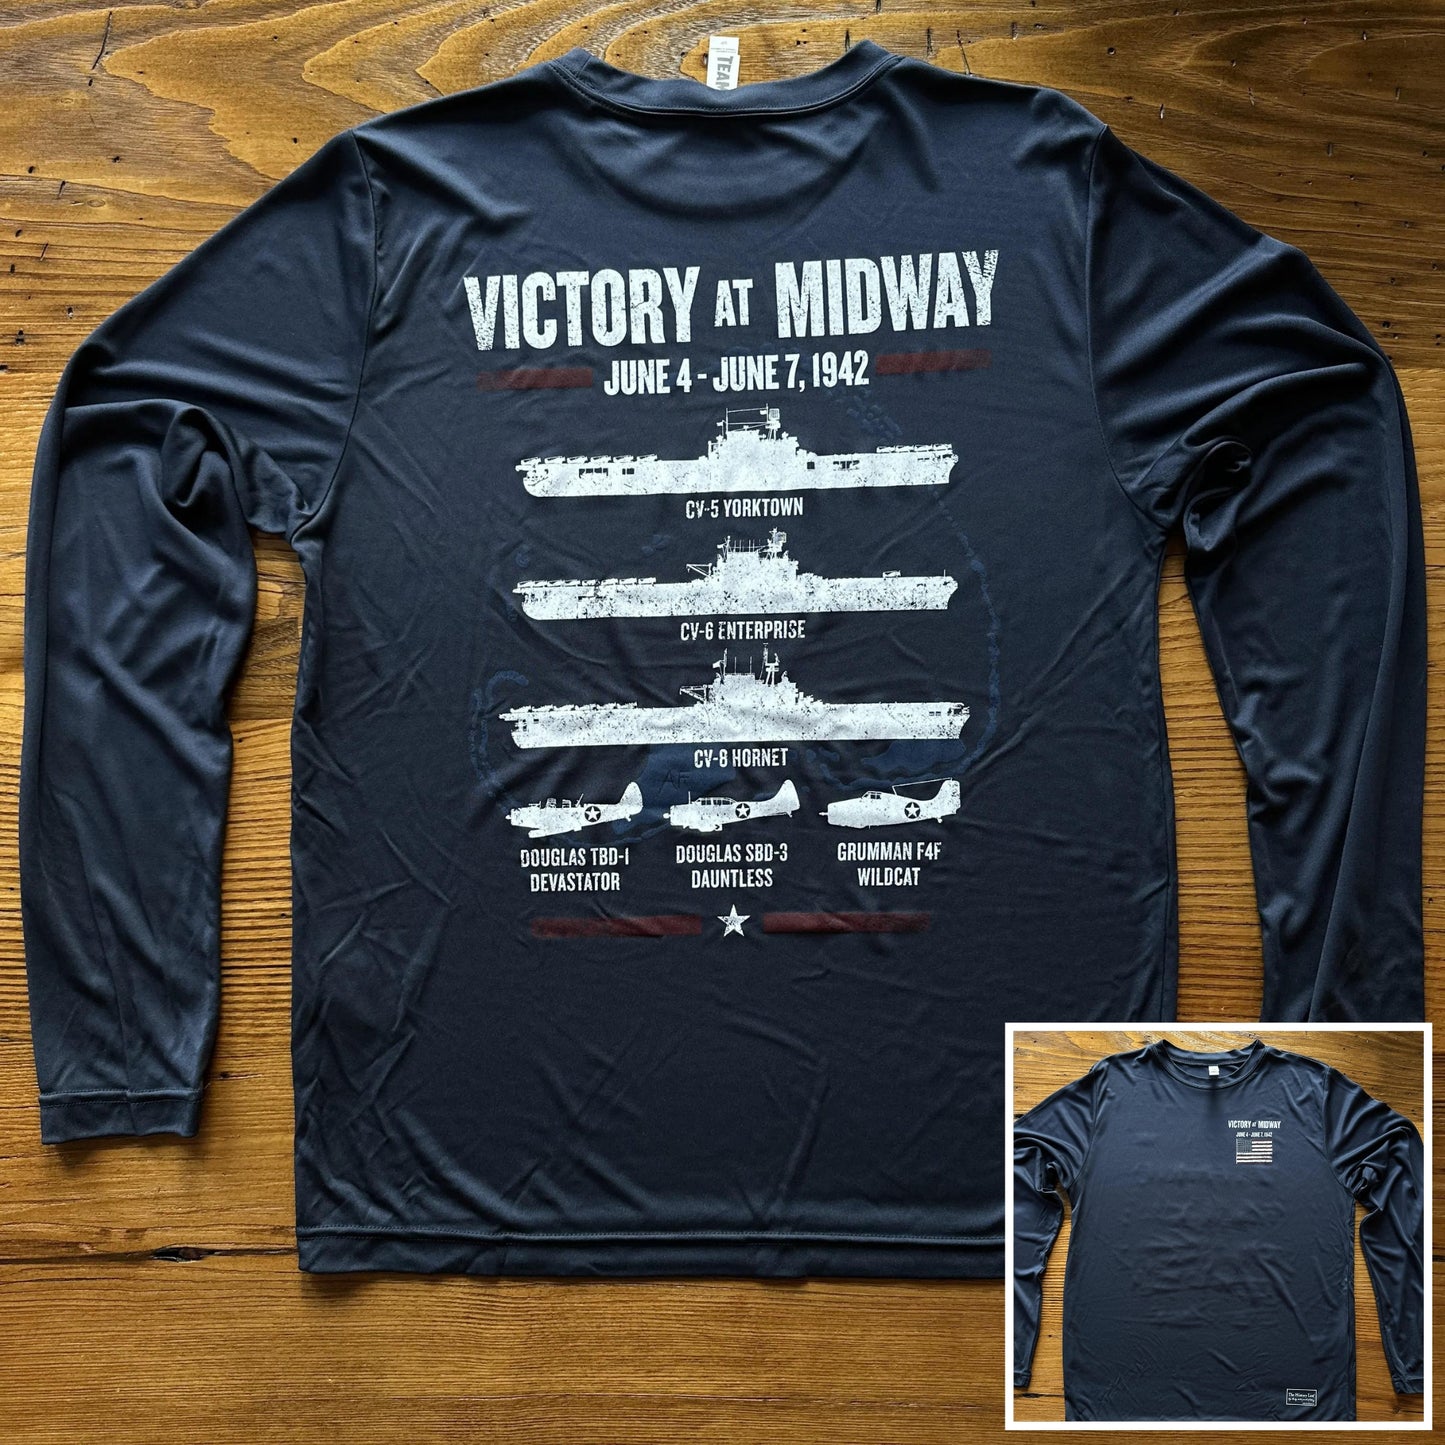 Men's "Victory at Midway" on moisture-wicking 100% polyester interlock with SPF 40+ UV protection - Long-sleeved from The History List store